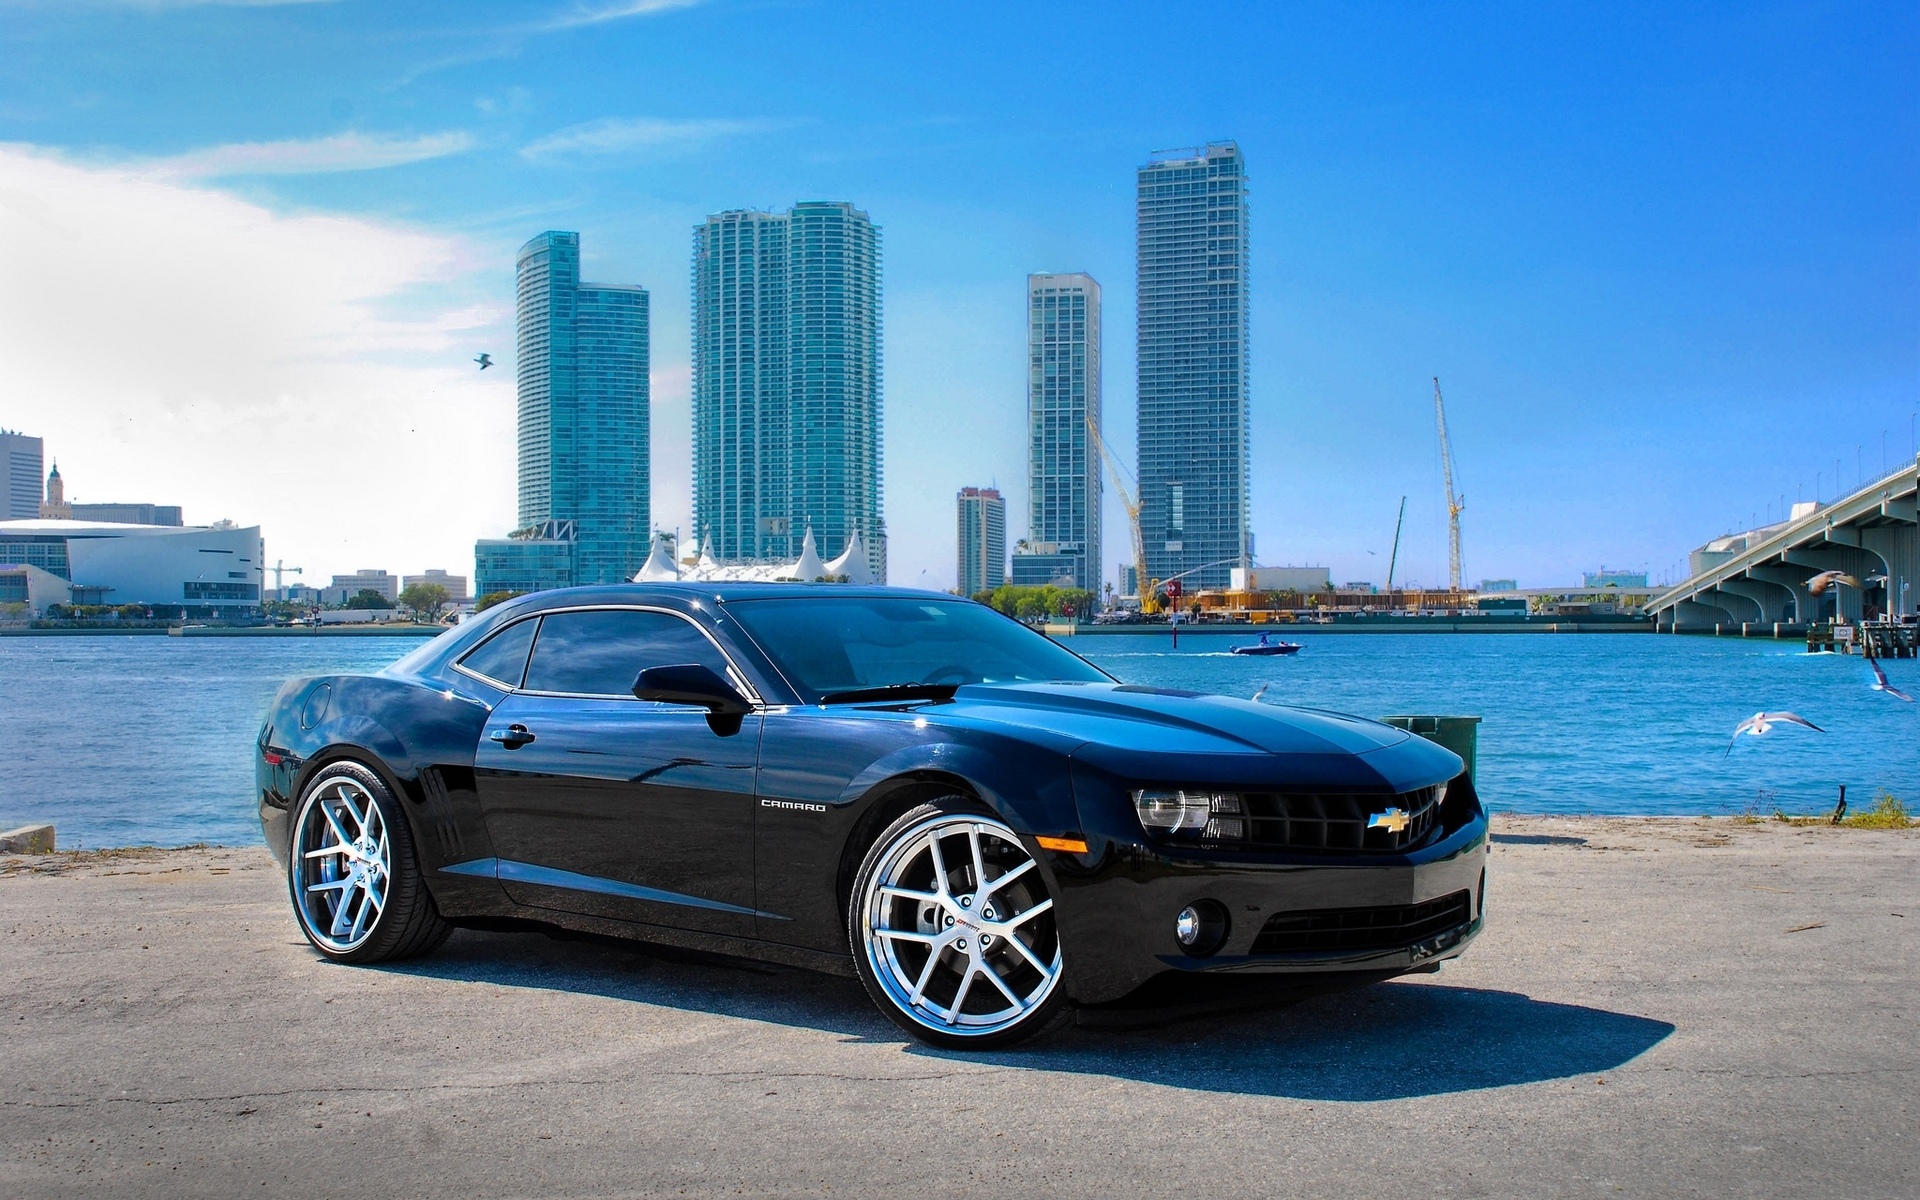 chevrolet, Camaro, Ss, Tuning, Muscle, Cars, Hot, Rods, Black, Architecture, Buildings, Skyscrapers Wallpaper